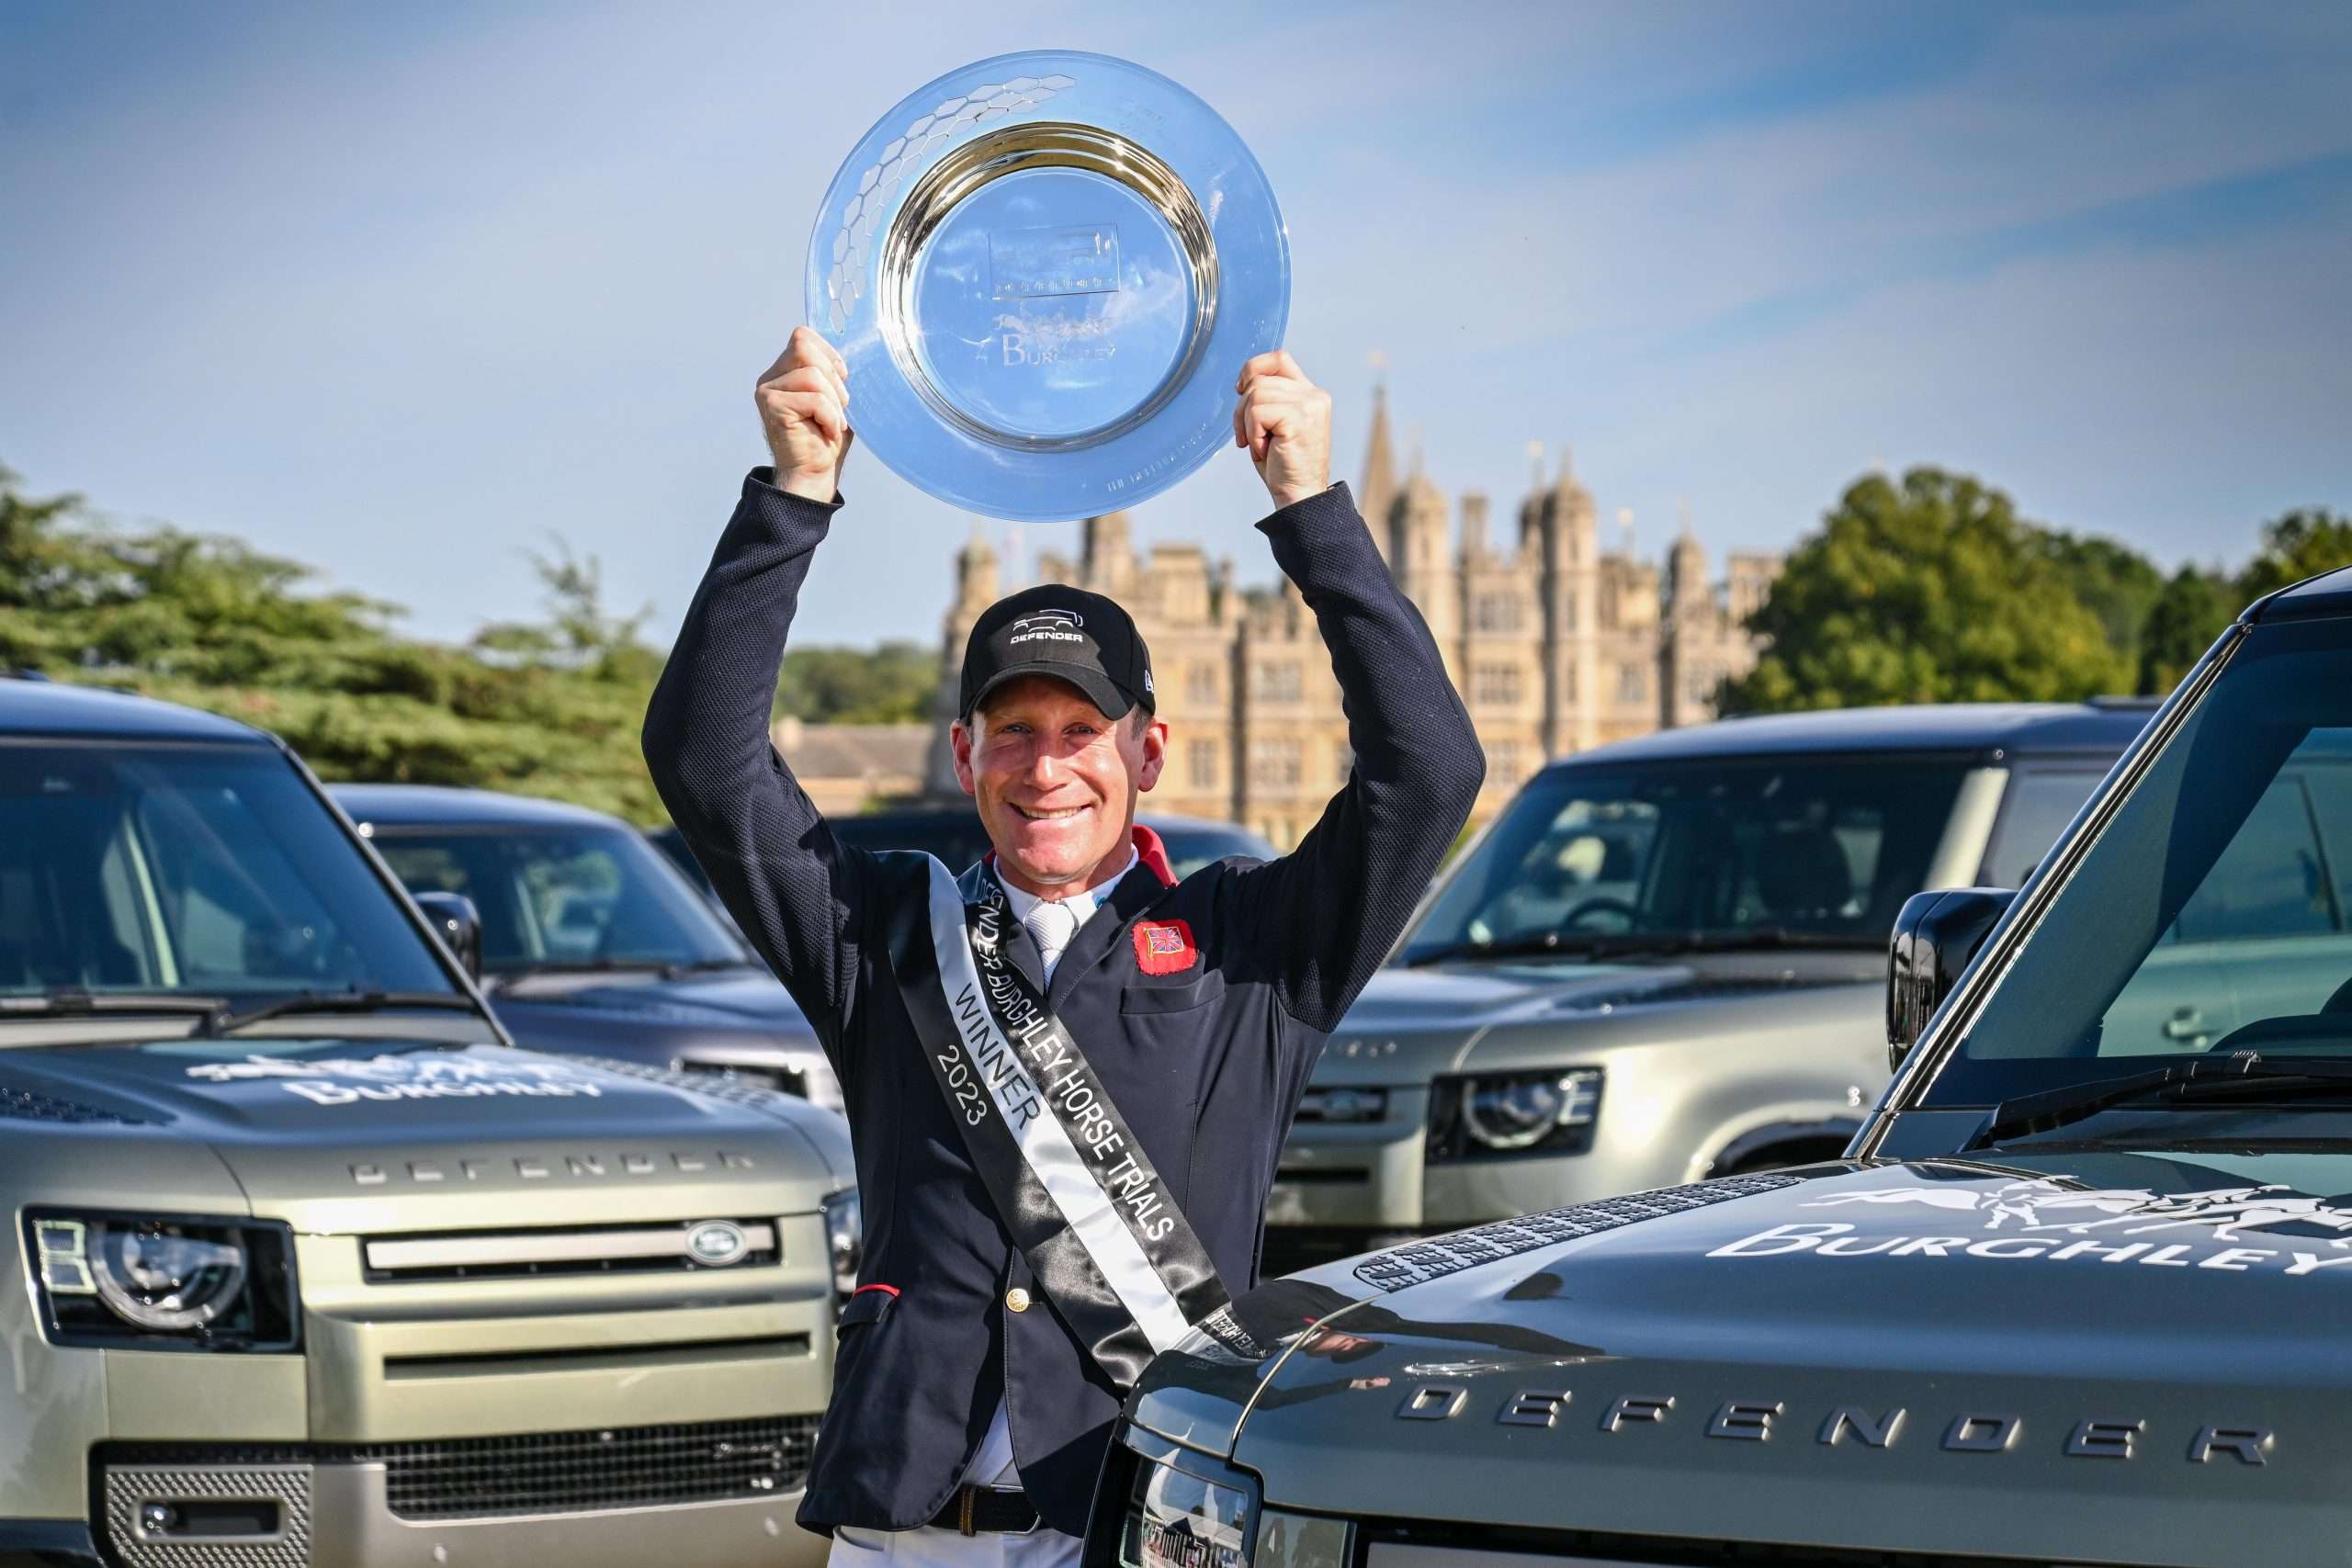 Oliver Townend with Ballaghmor Class for GBR winners of the Defender Burghley Horse Trials, in the parkland of Burghley House near Stamford in Lincolnshire in the UK on the 30th August to 3 September 2023.